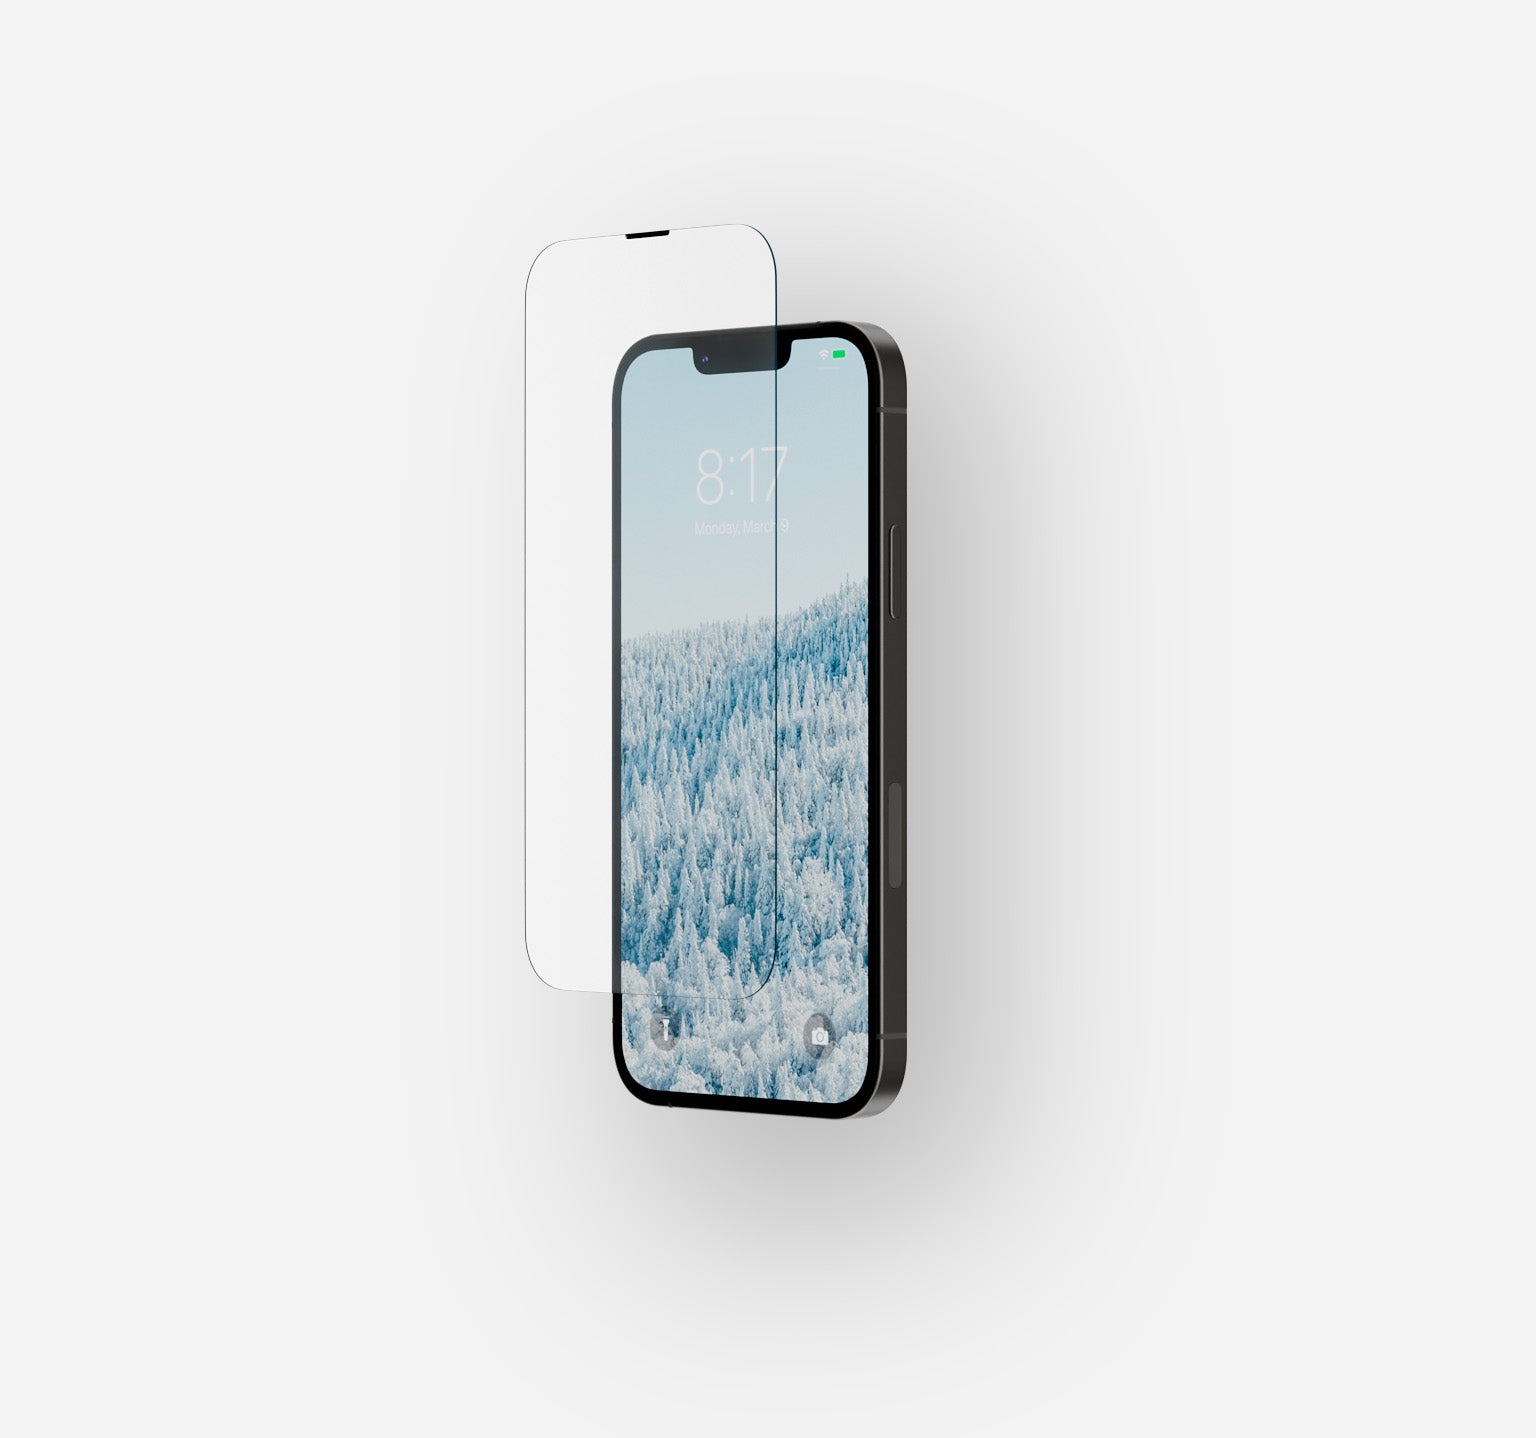 iPhone 13 Pro Case from BandWerk – Nappa